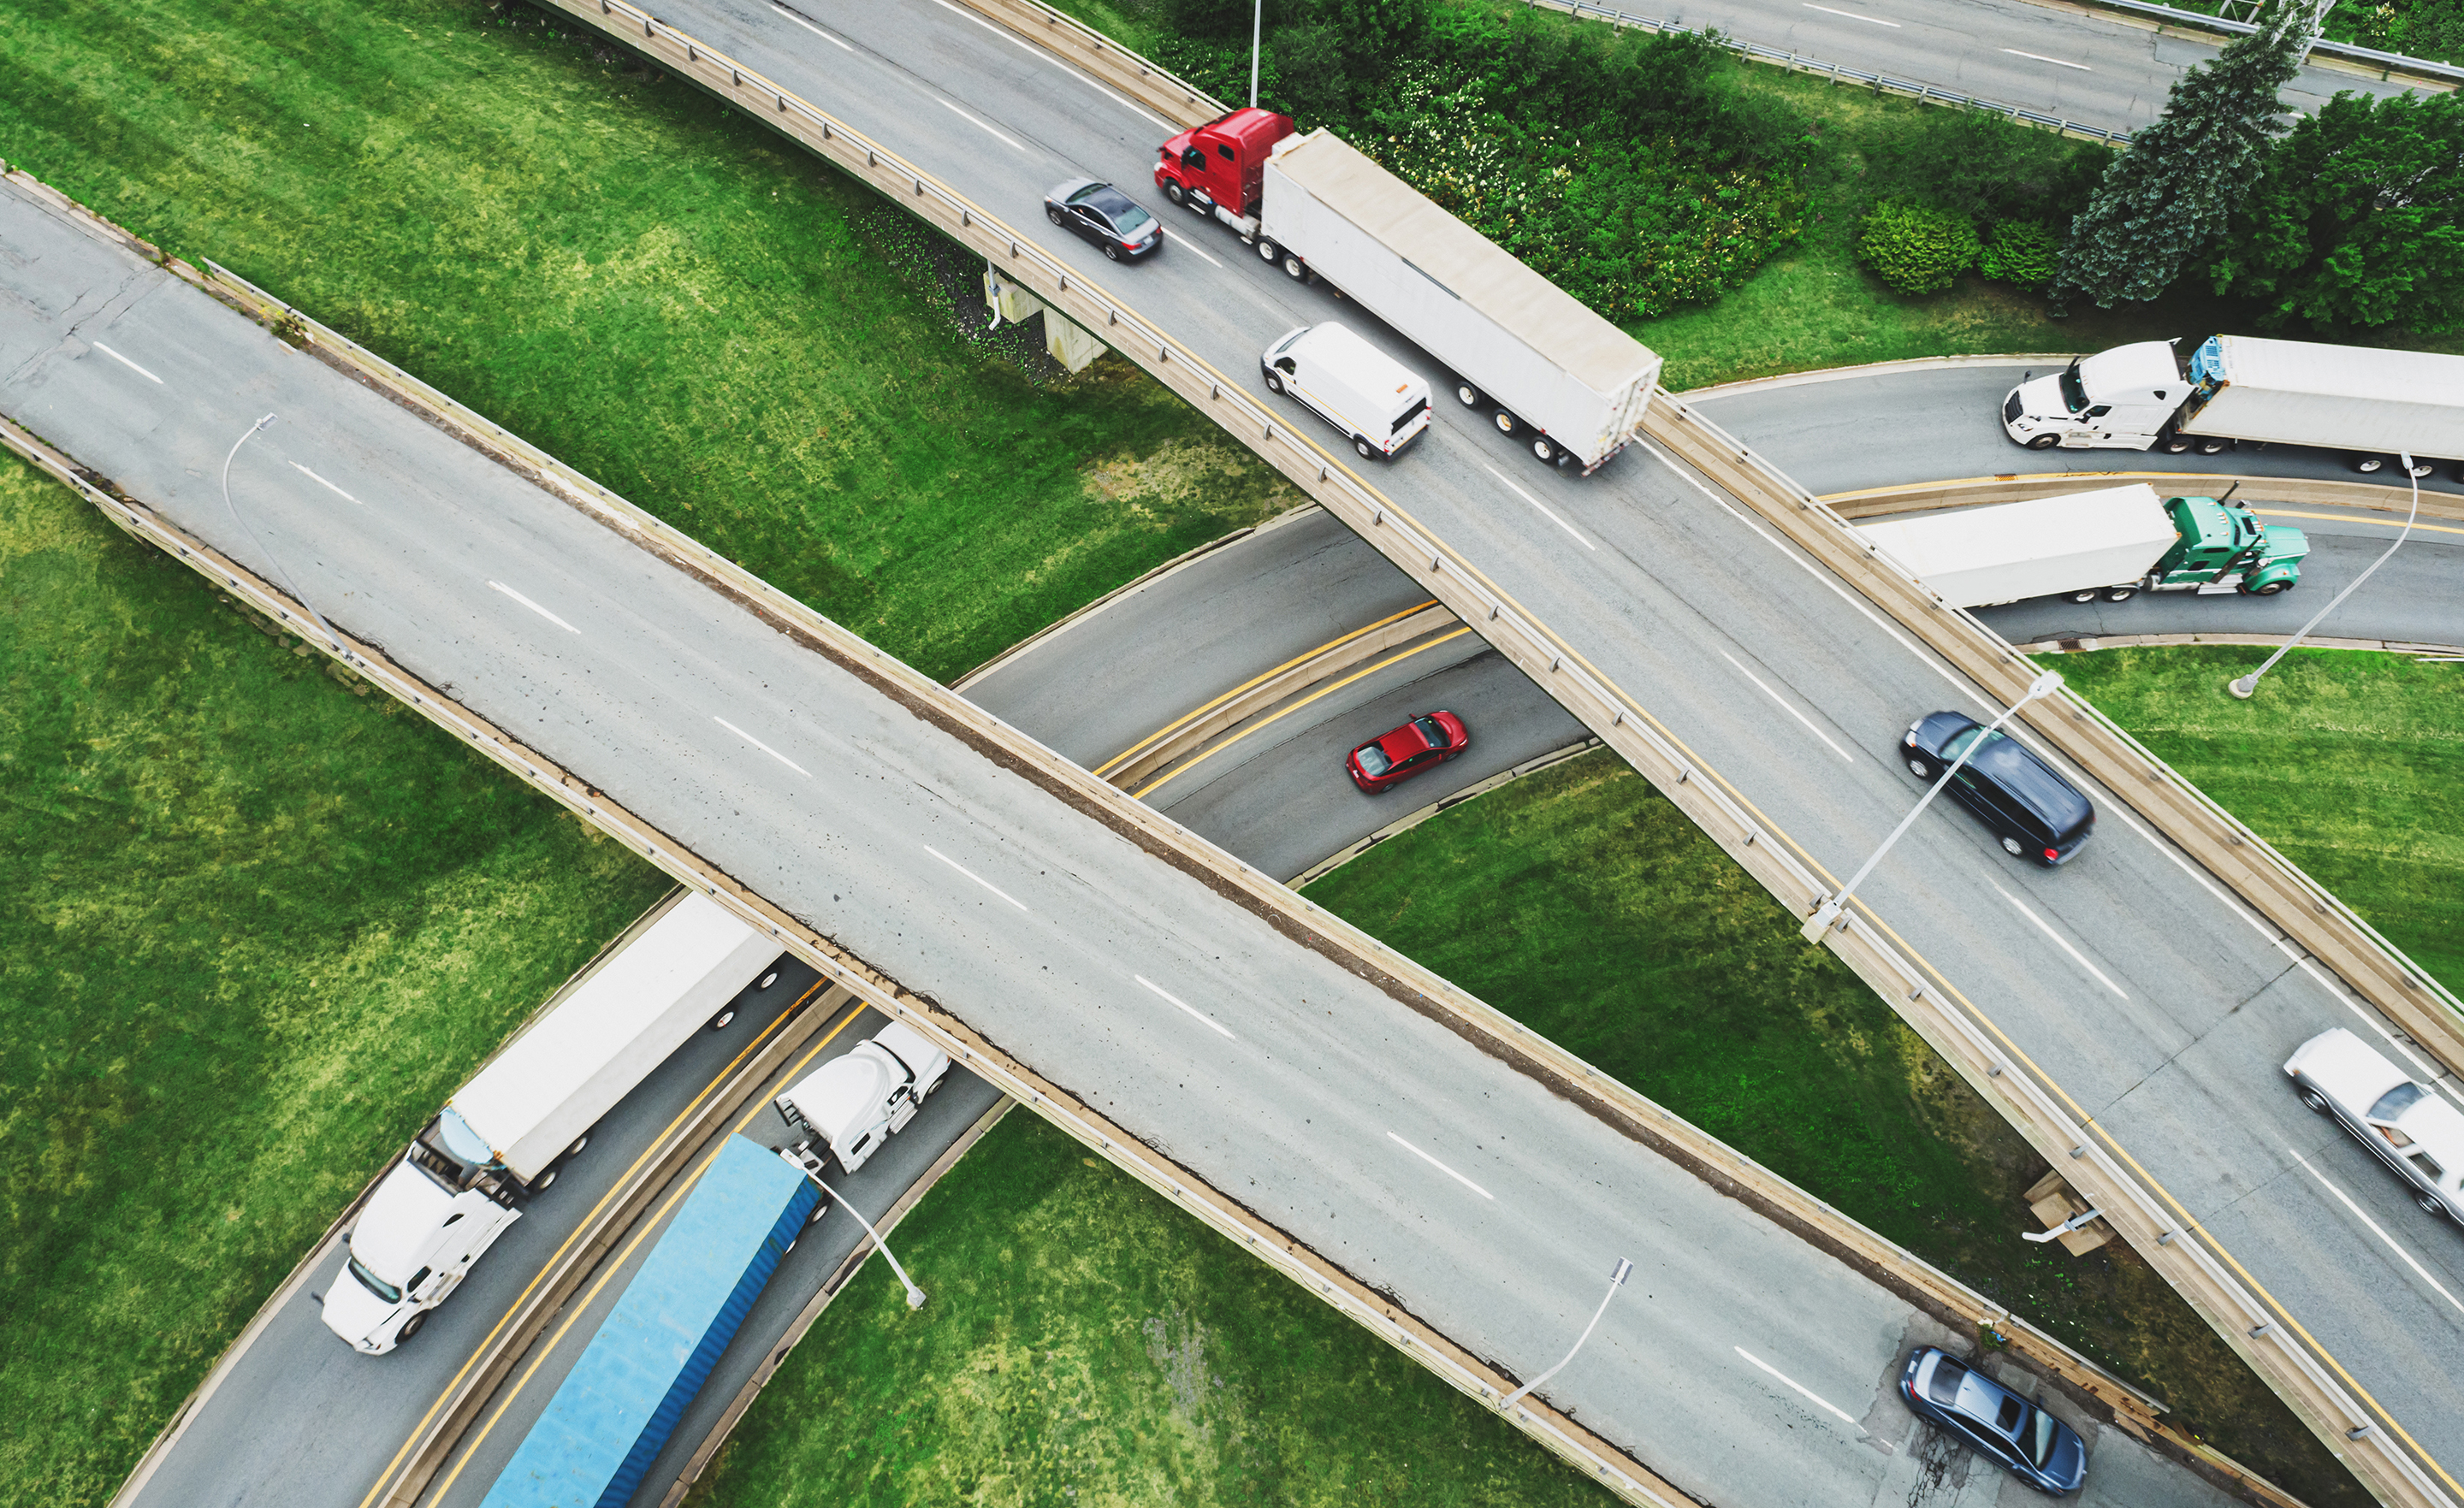 Aerial view of red semi-truck on a highway.